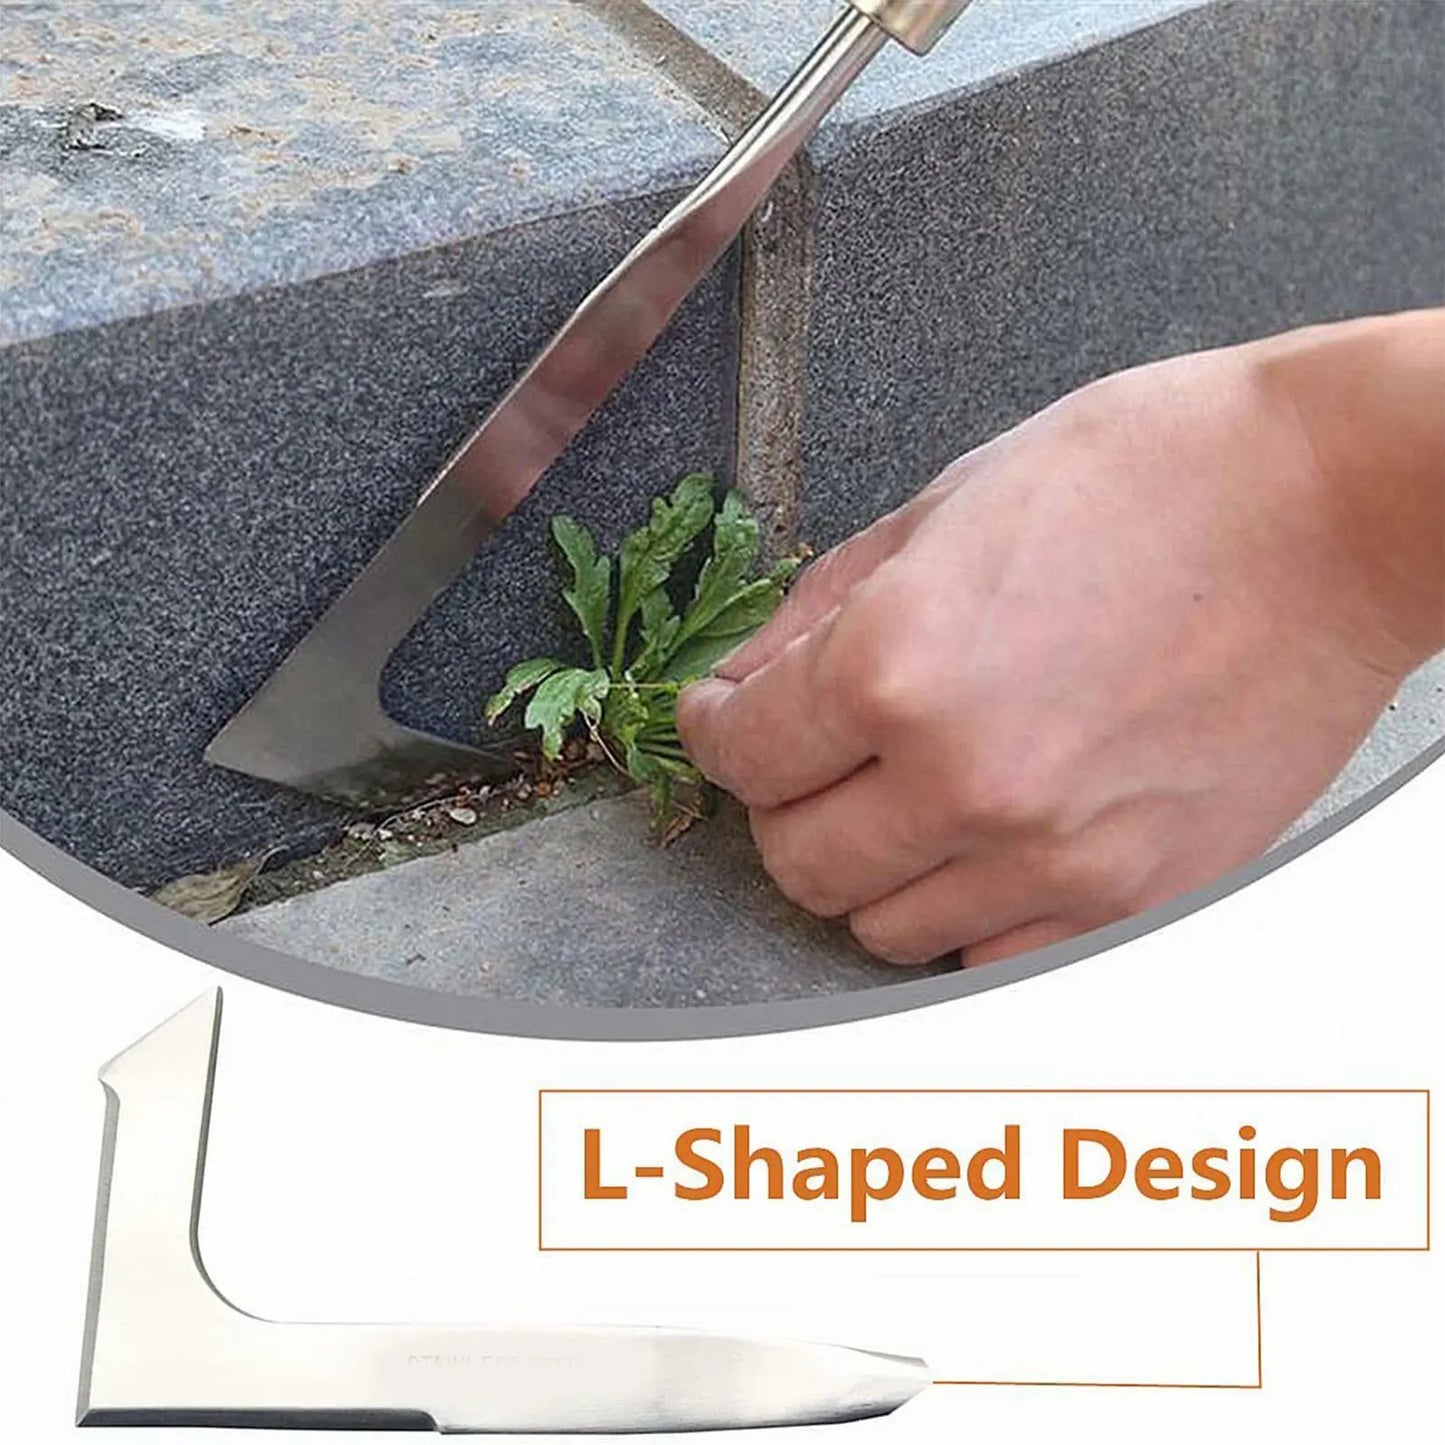 L Shaped Hand Crevice Weeder Root Remover Tool Outdoor Weeder Portable Weed Puller Handled Up Manual Stainless Steel Garden Tool